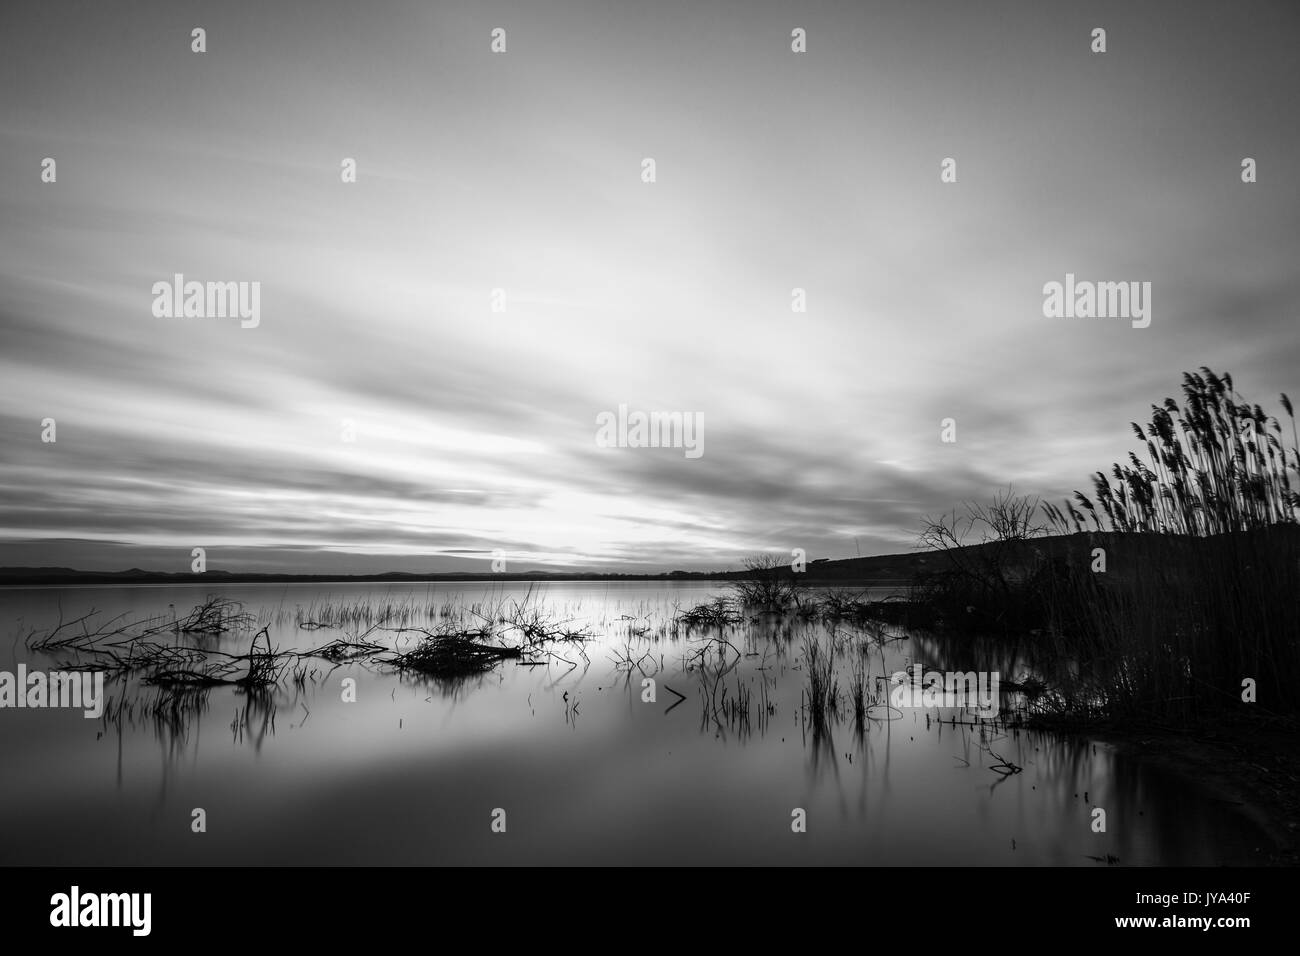 Lake at sunset, with trees and branches coming out of water, and a beautiful sky with long, striped clouds Stock Photo